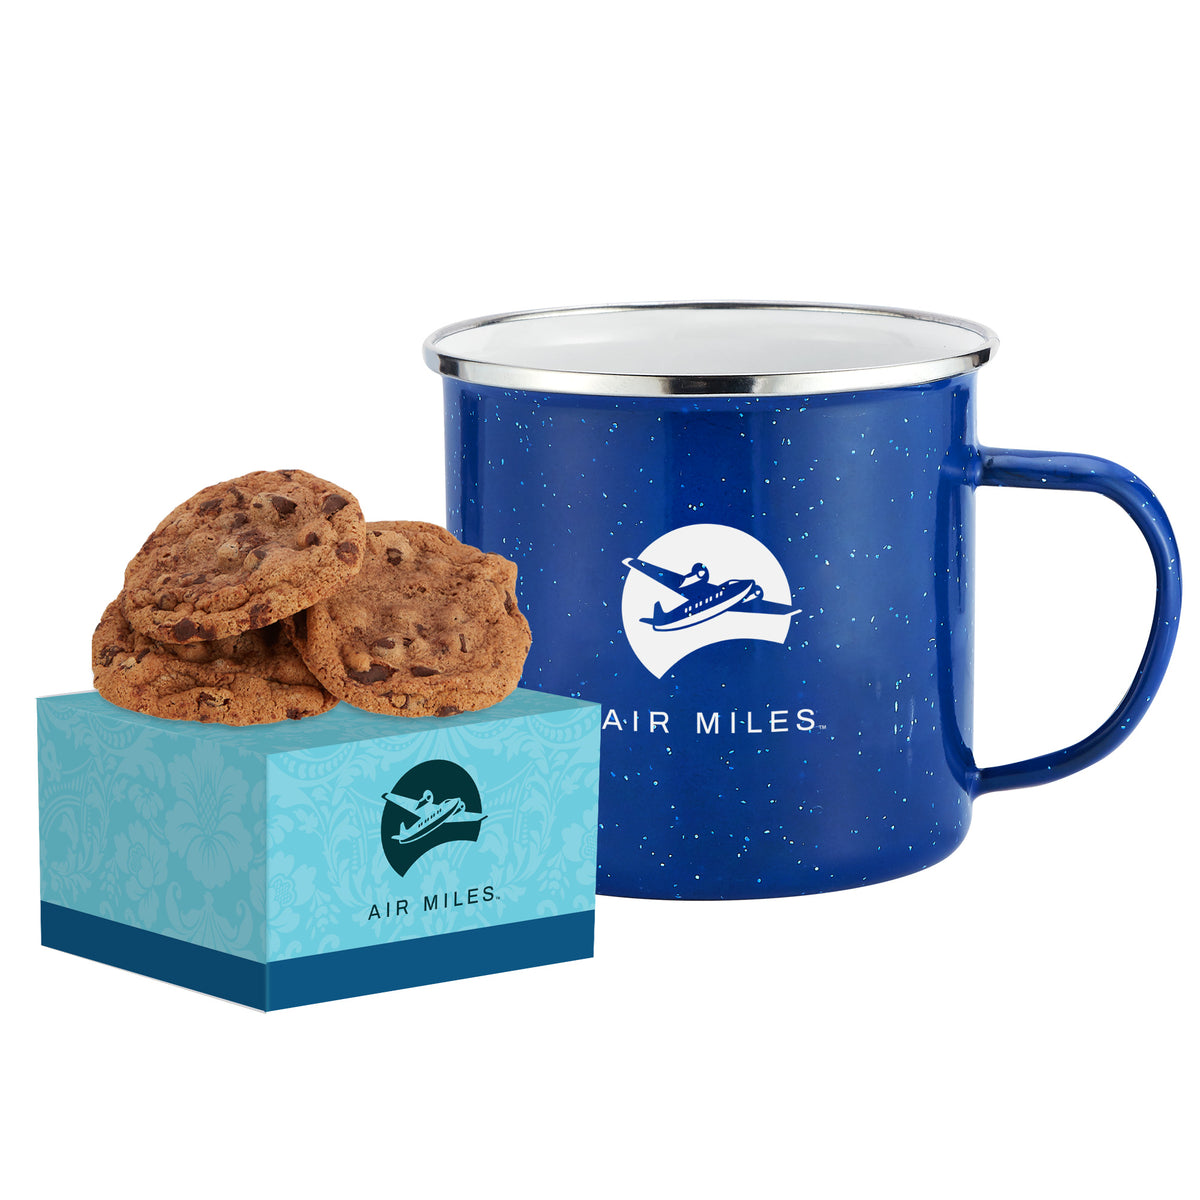 Speckled Camping Mug - 16 oz., Gourmet Chocolate Chunk Cookie Box (3)